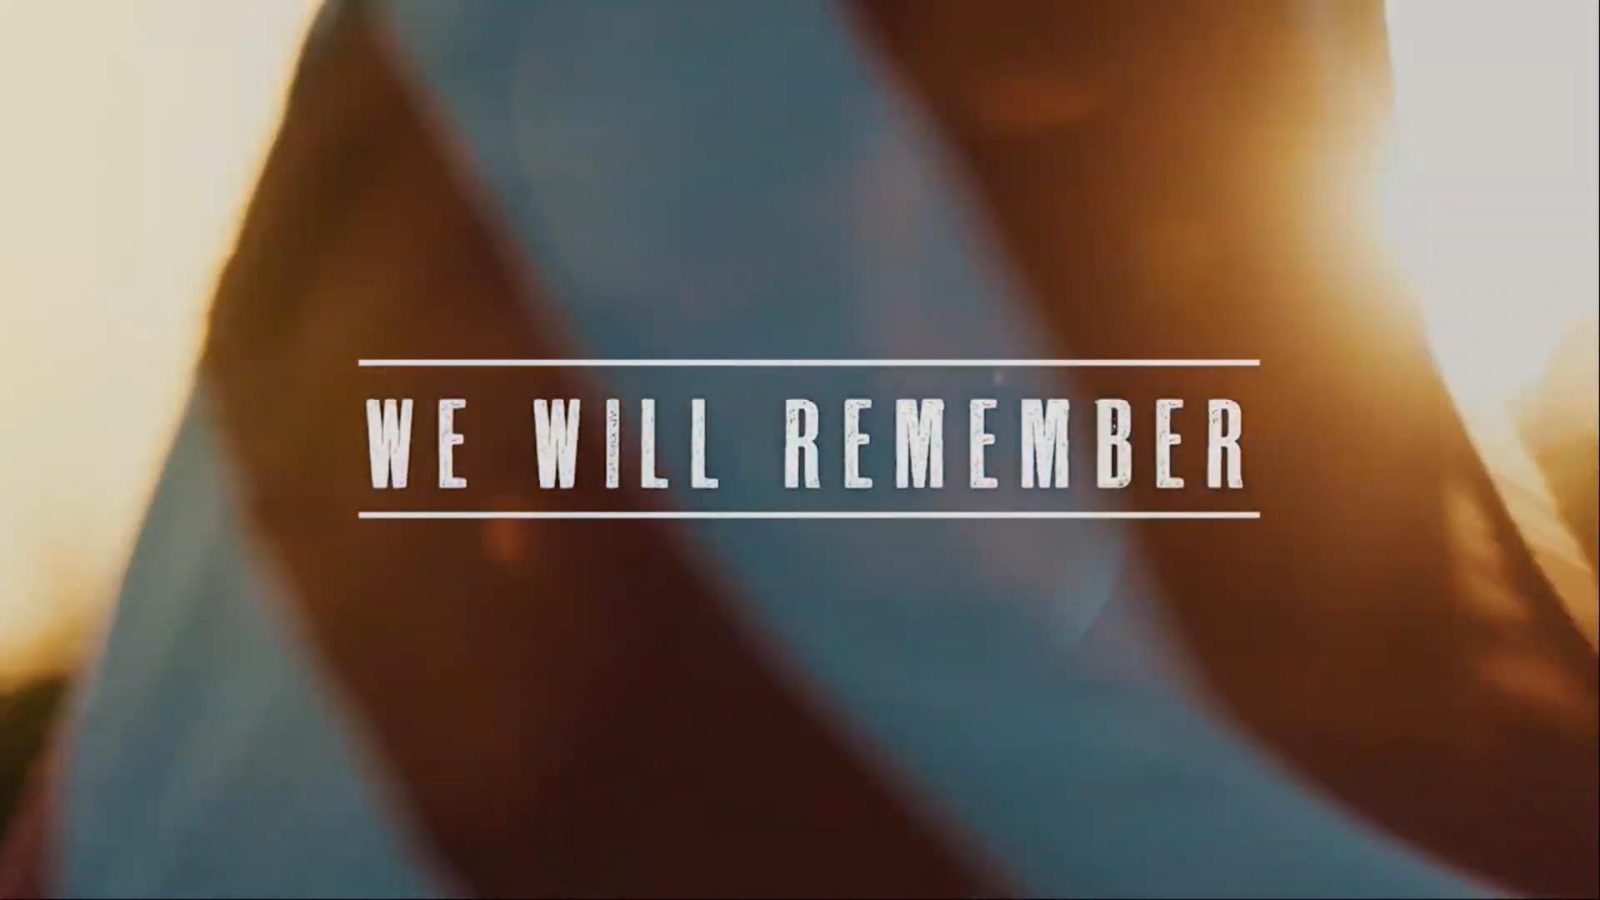 We Will Remember